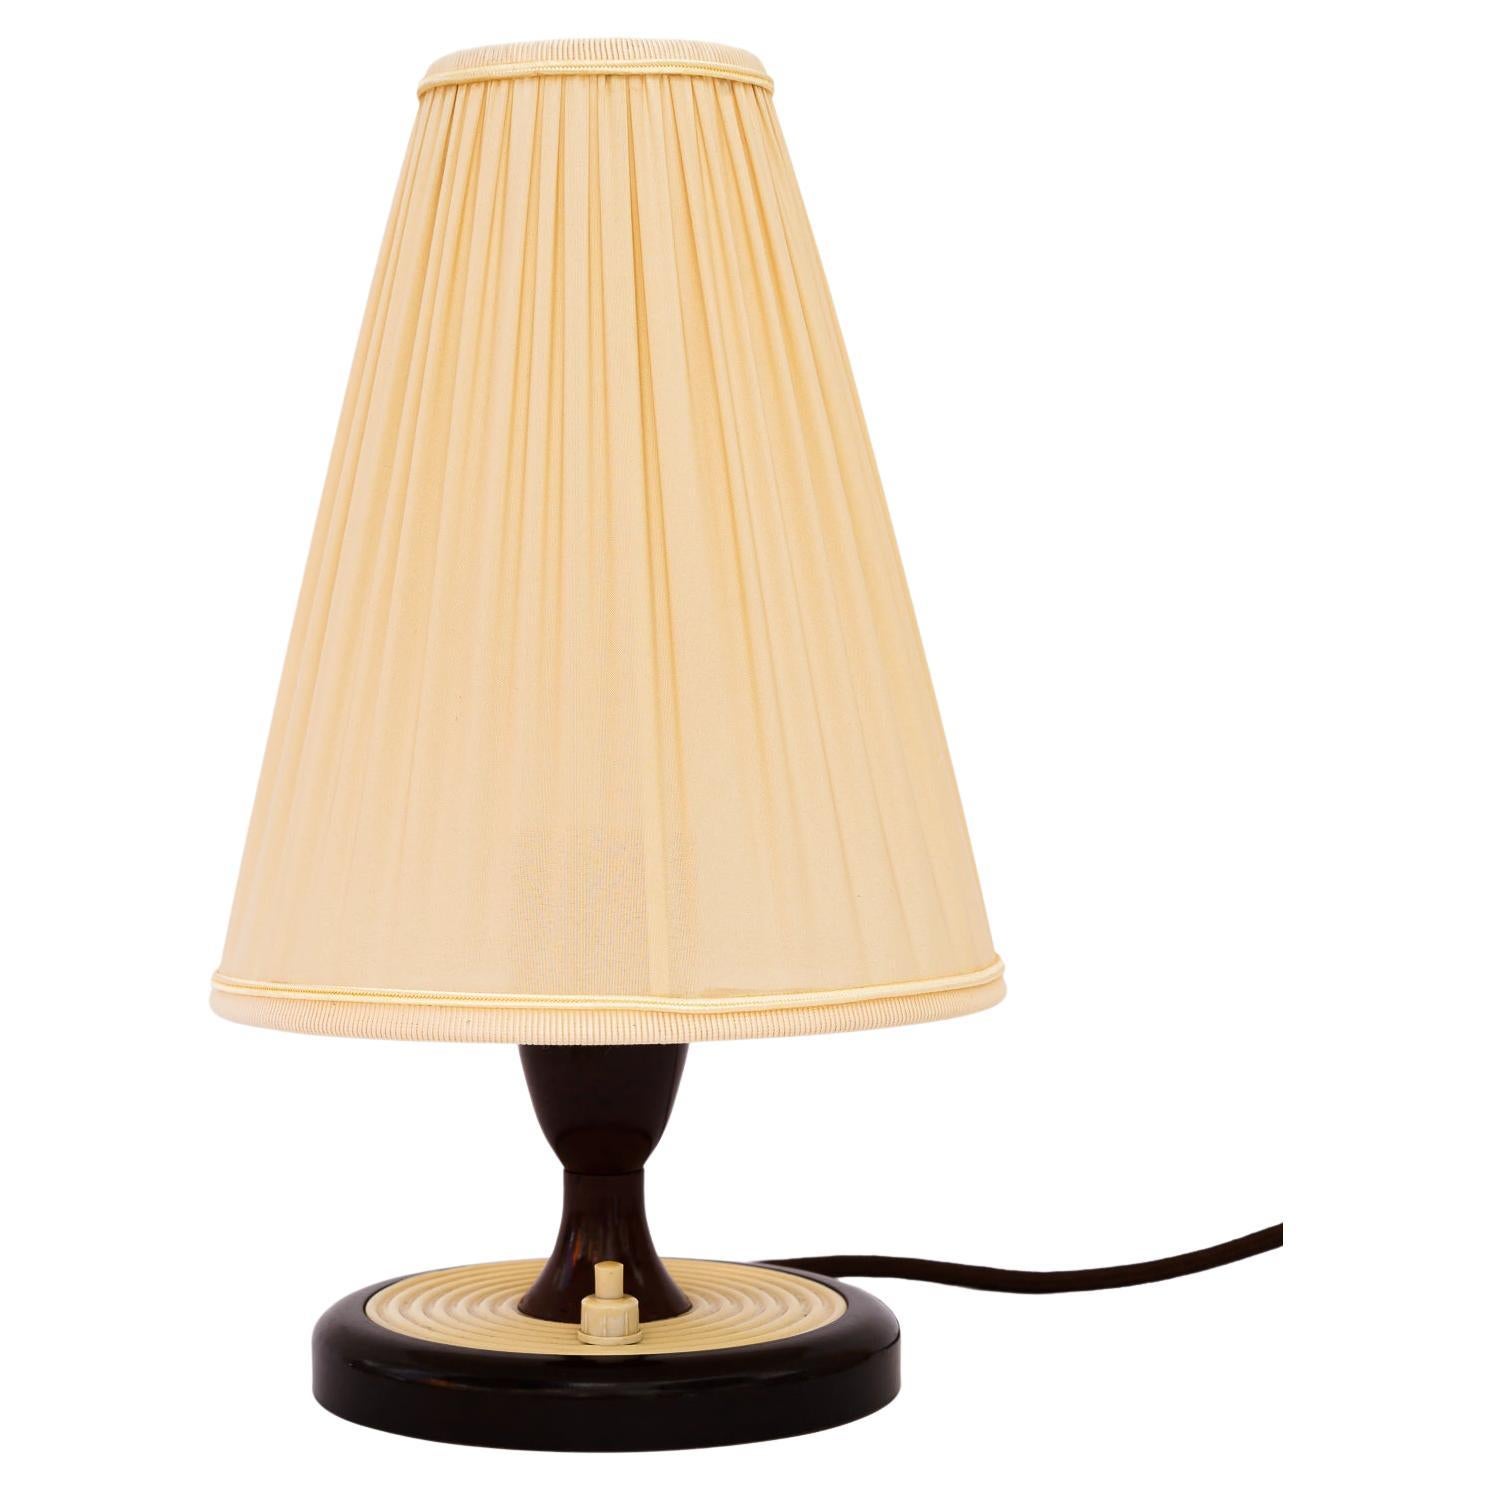 Bakelite Table Lamp Vienna with Fabric Shade Around, 1960s For Sale